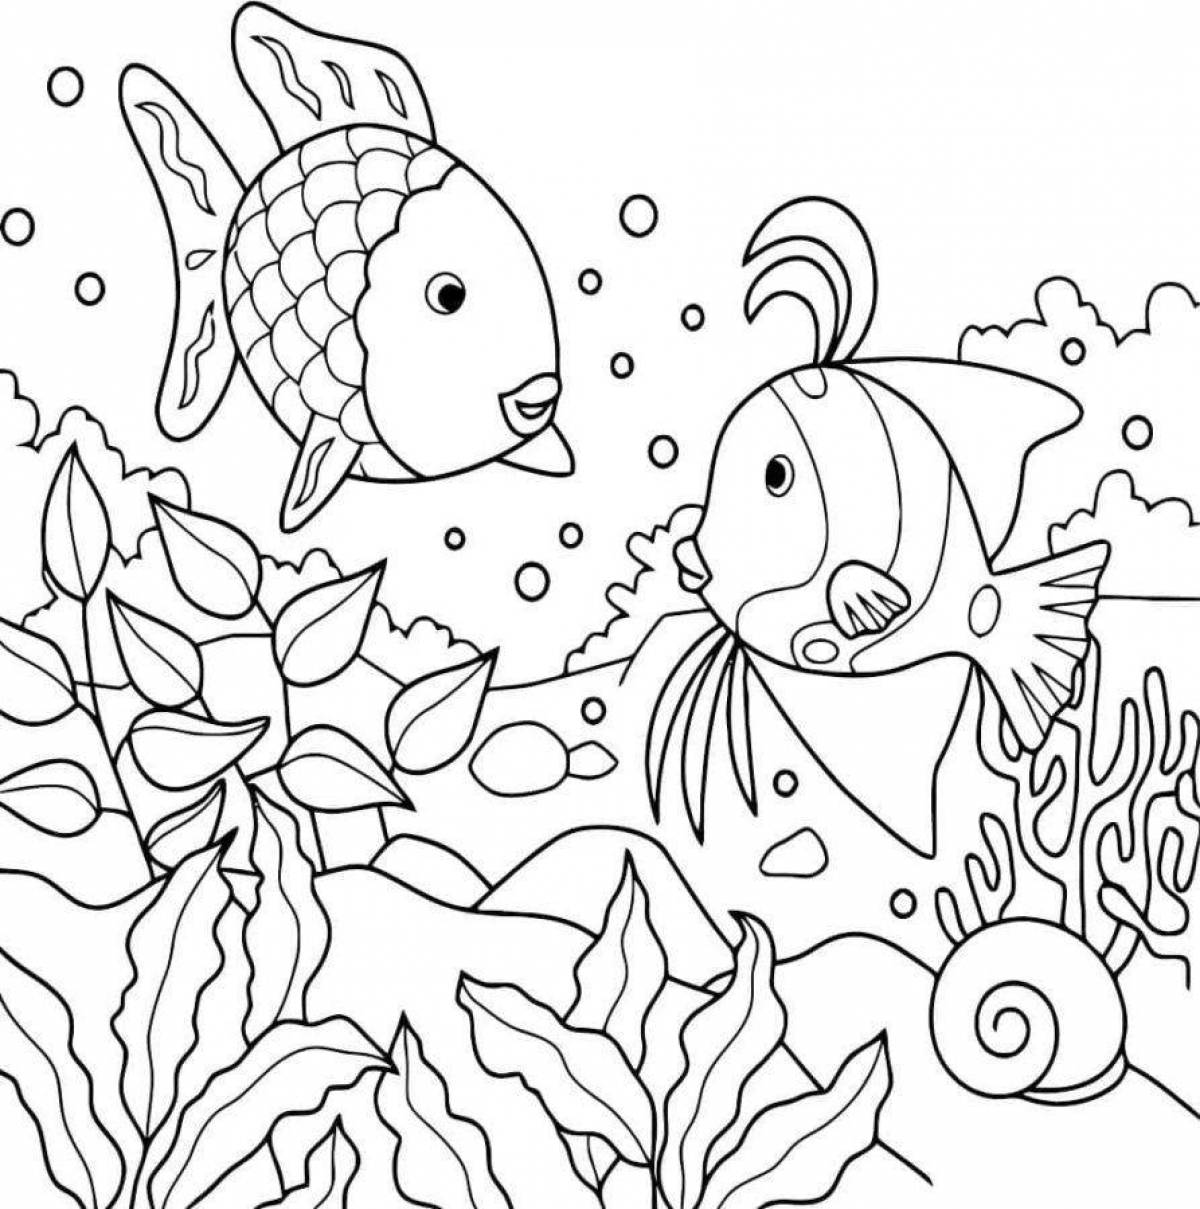 Amazing fish coloring pages for girls